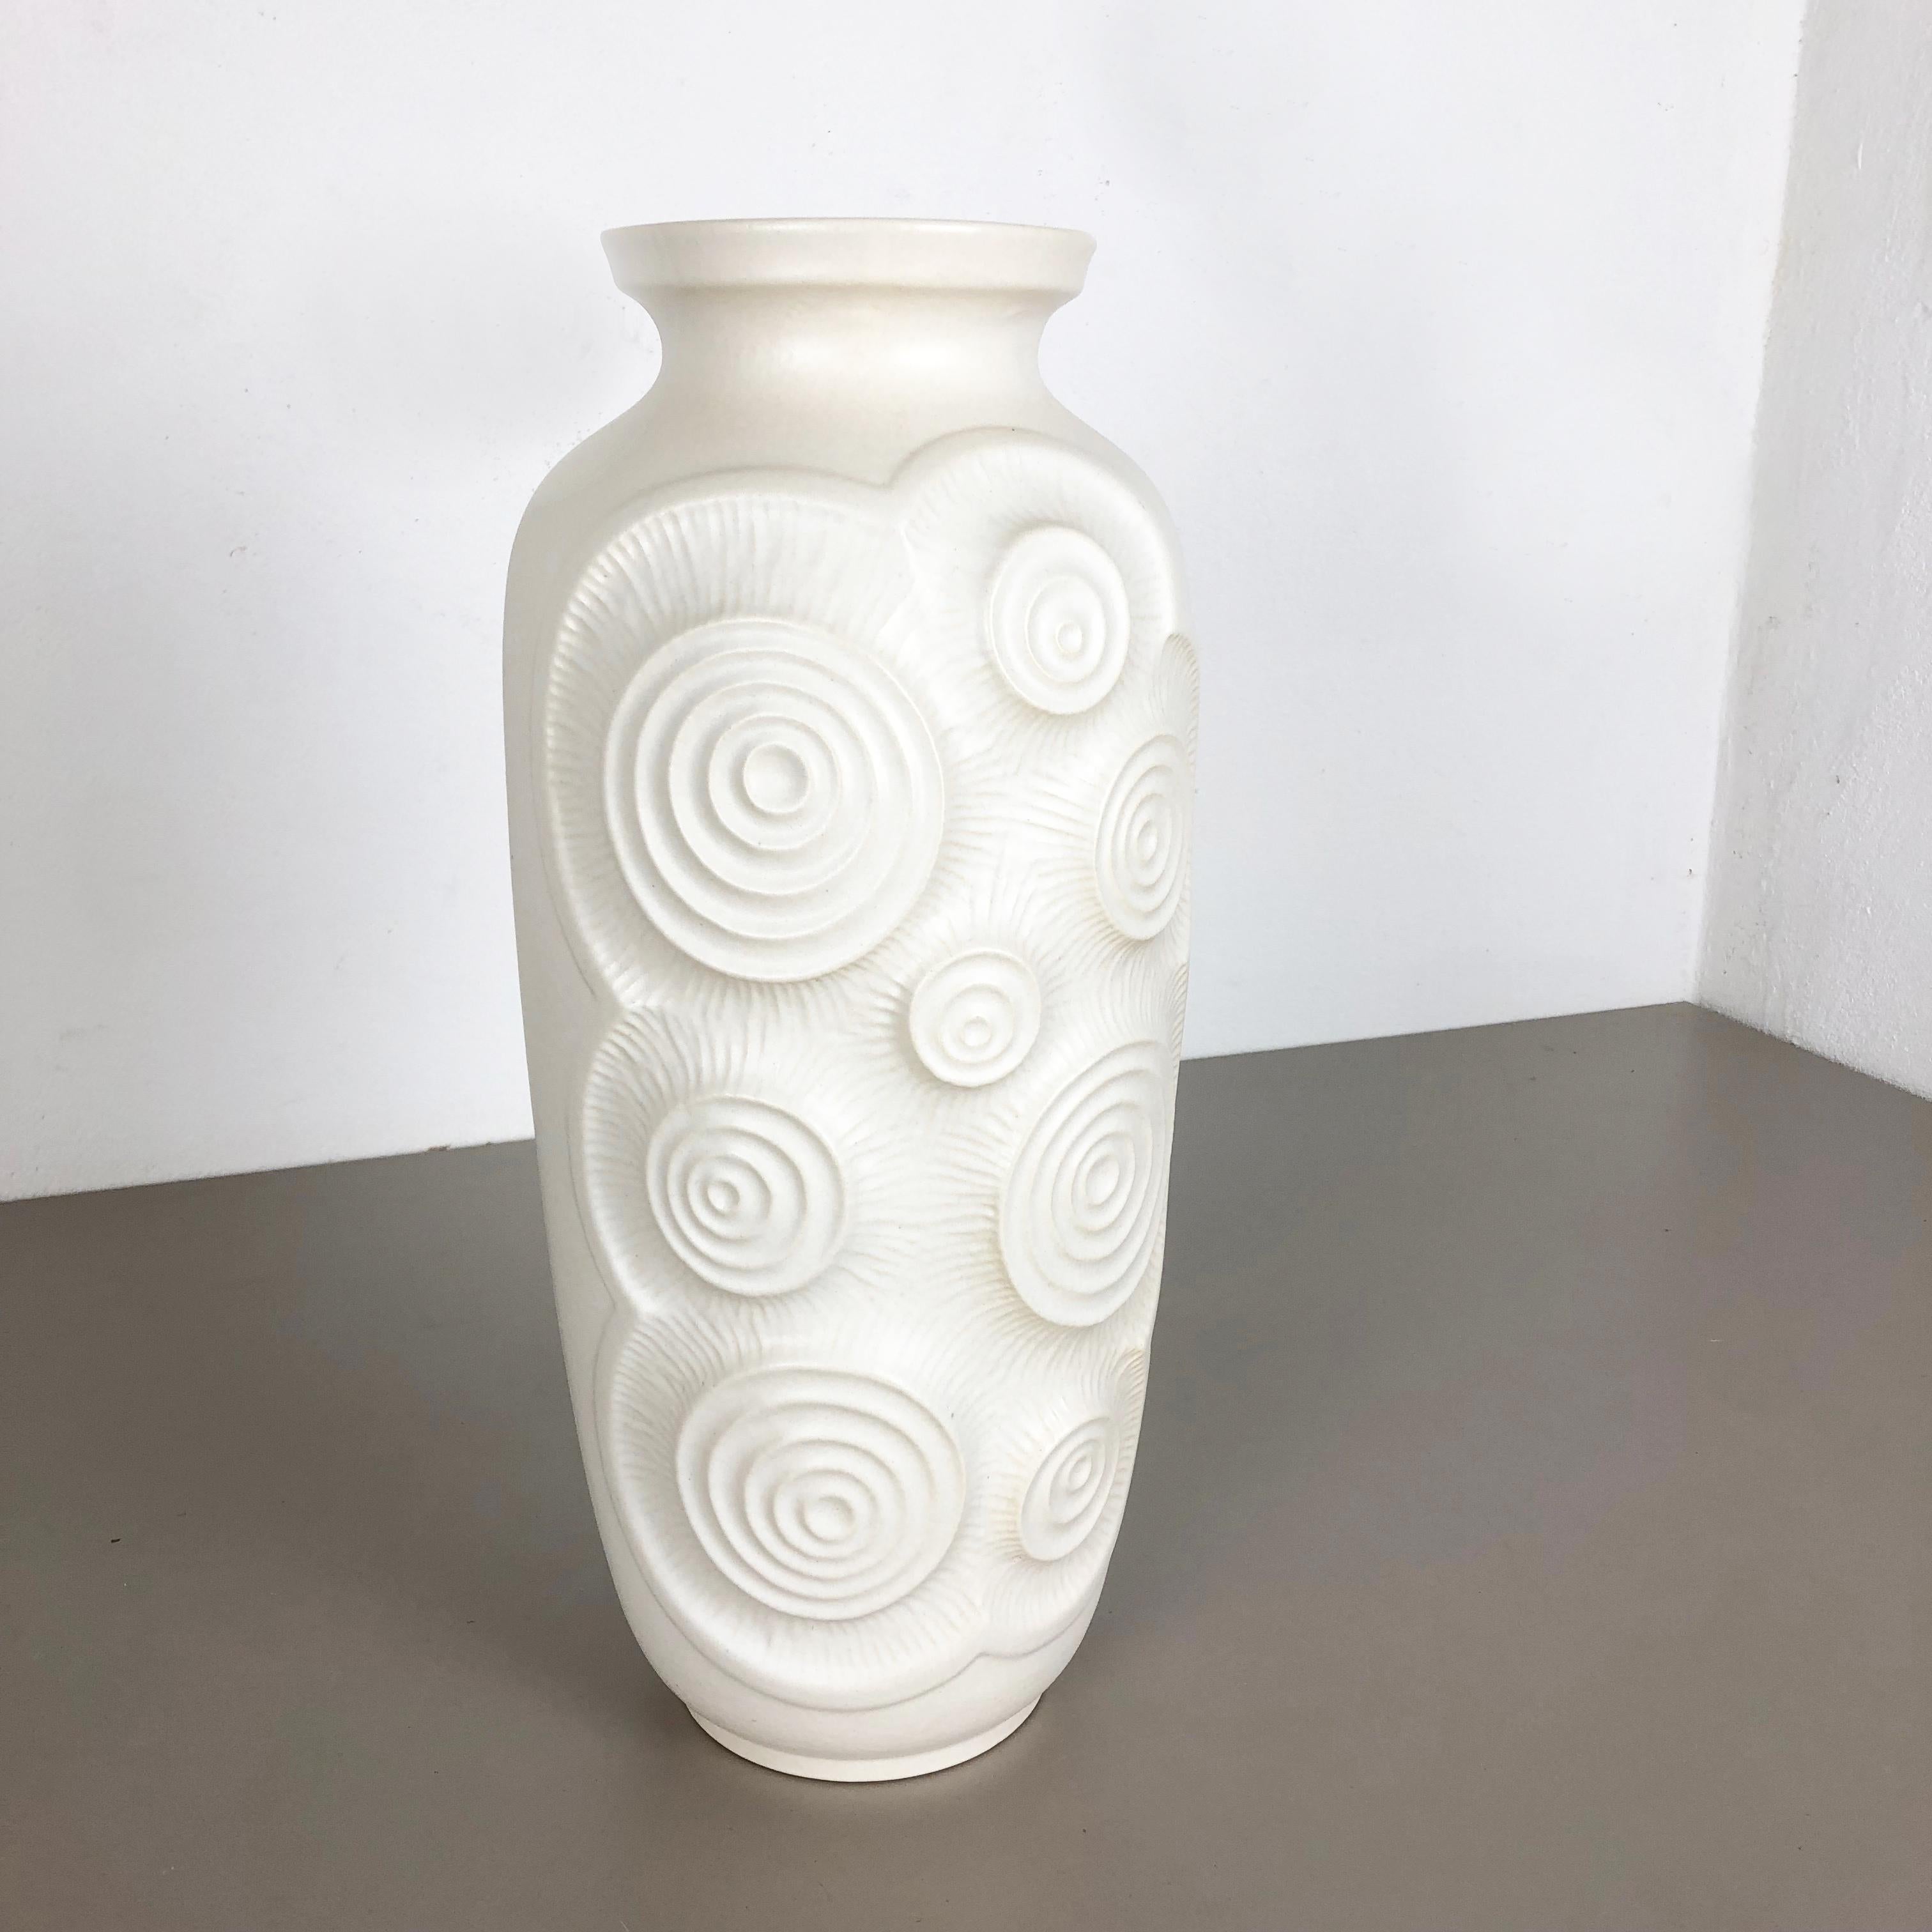 Article:

Pottery ceramic vase


Producer:

BAY Ceramic, Germany


Decade:

1960s



Description:

Original vintage 1960s pottery ceramic vase made in Germany. High quality German production with a nice abstract illustration and